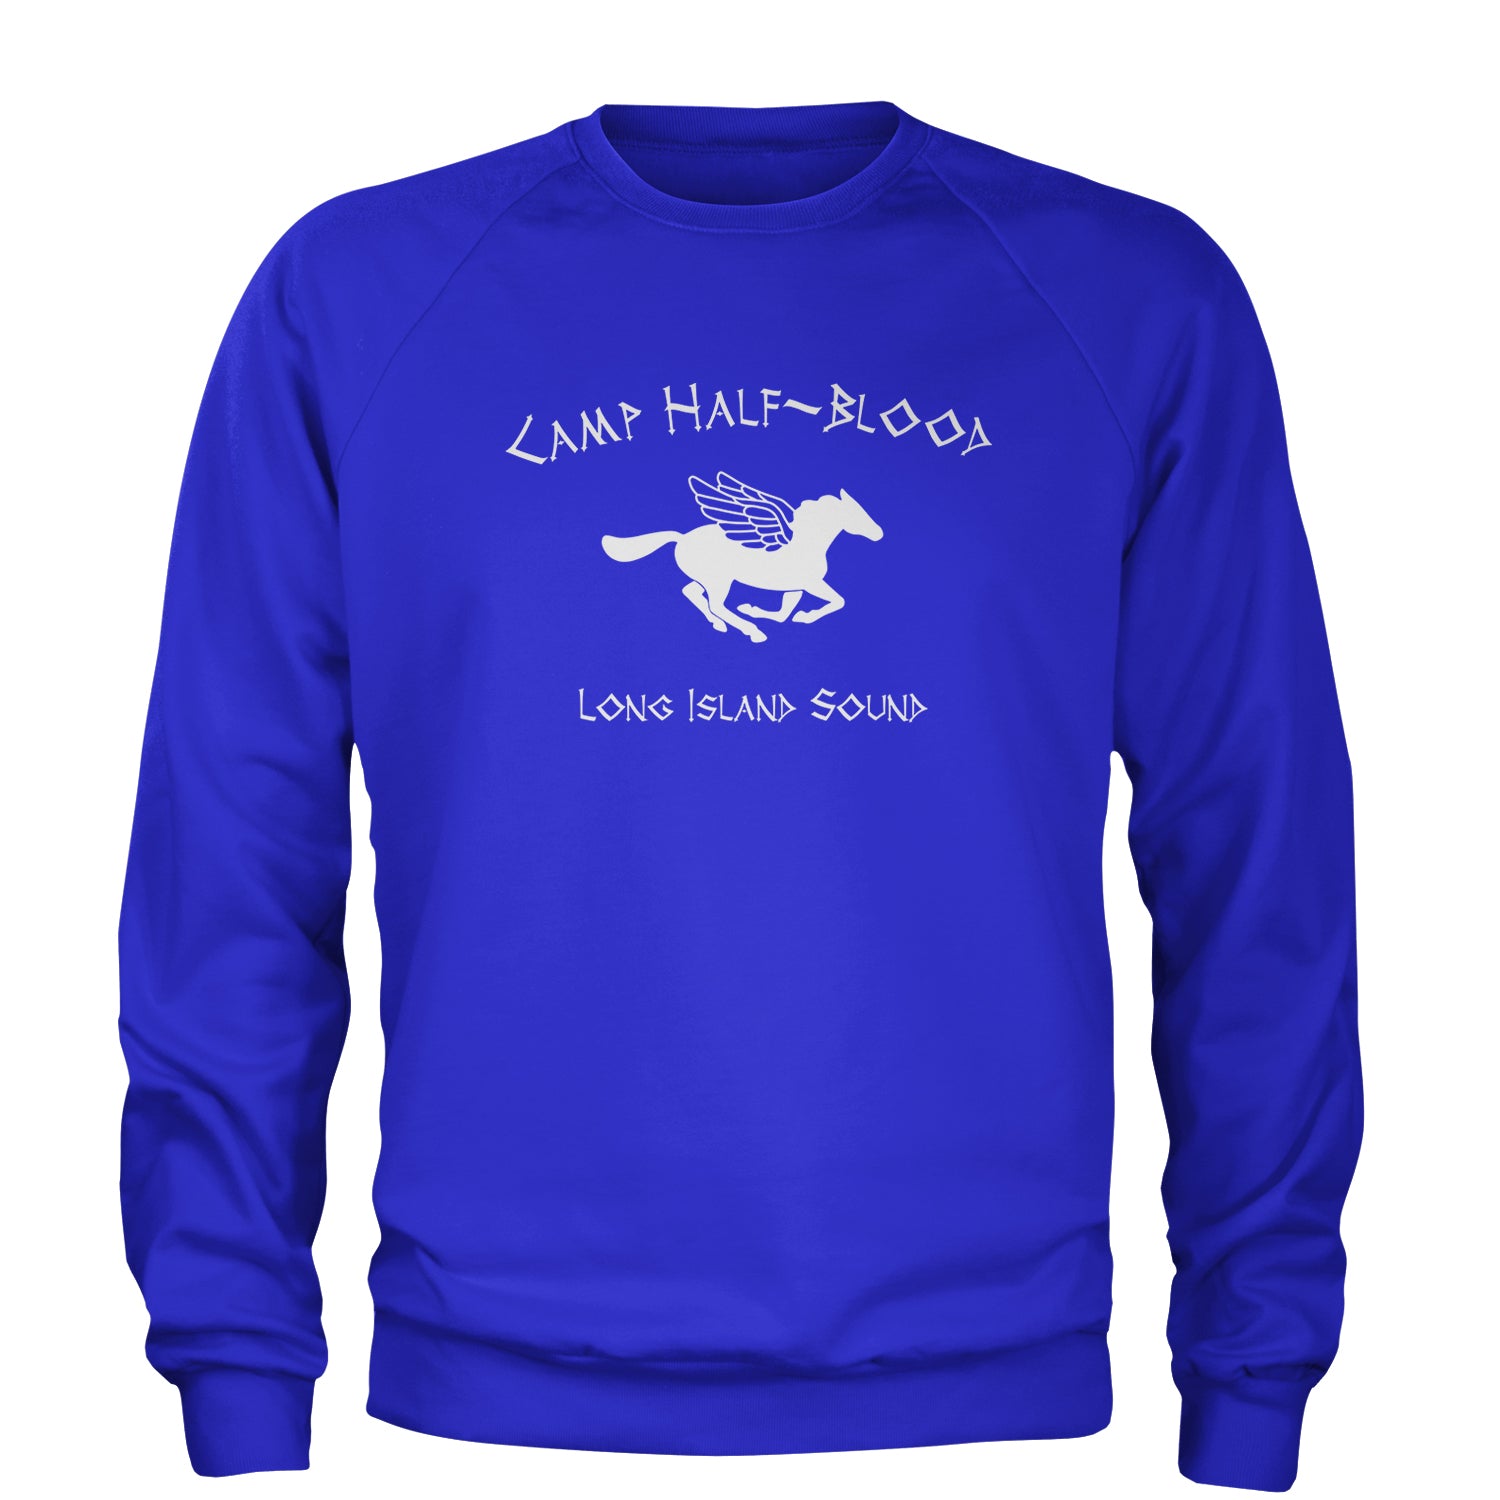 Camp Half Blood Long Island Sound Adult Crewneck Sweatshirt and, apollo, blood, camp, half, jackson, jupiter, olympians, percy, the by Expression Tees